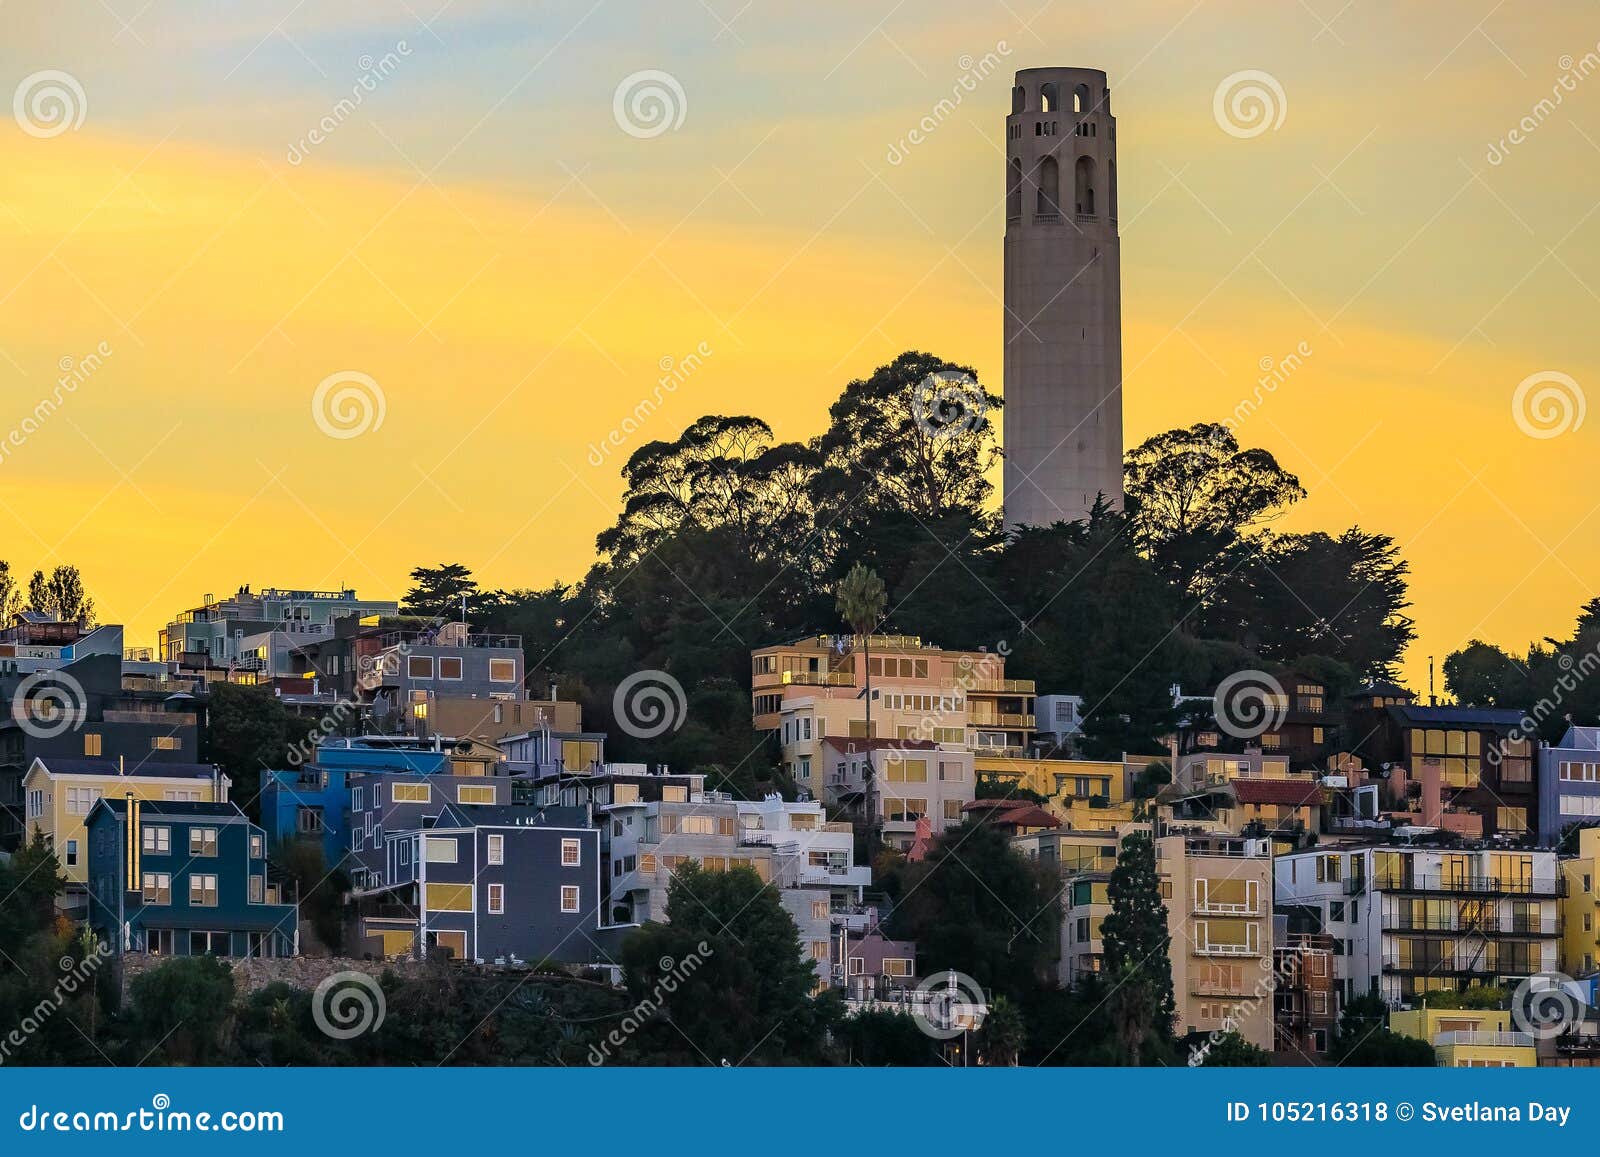 famous san francisco coit tower on telegraph hill at sunset